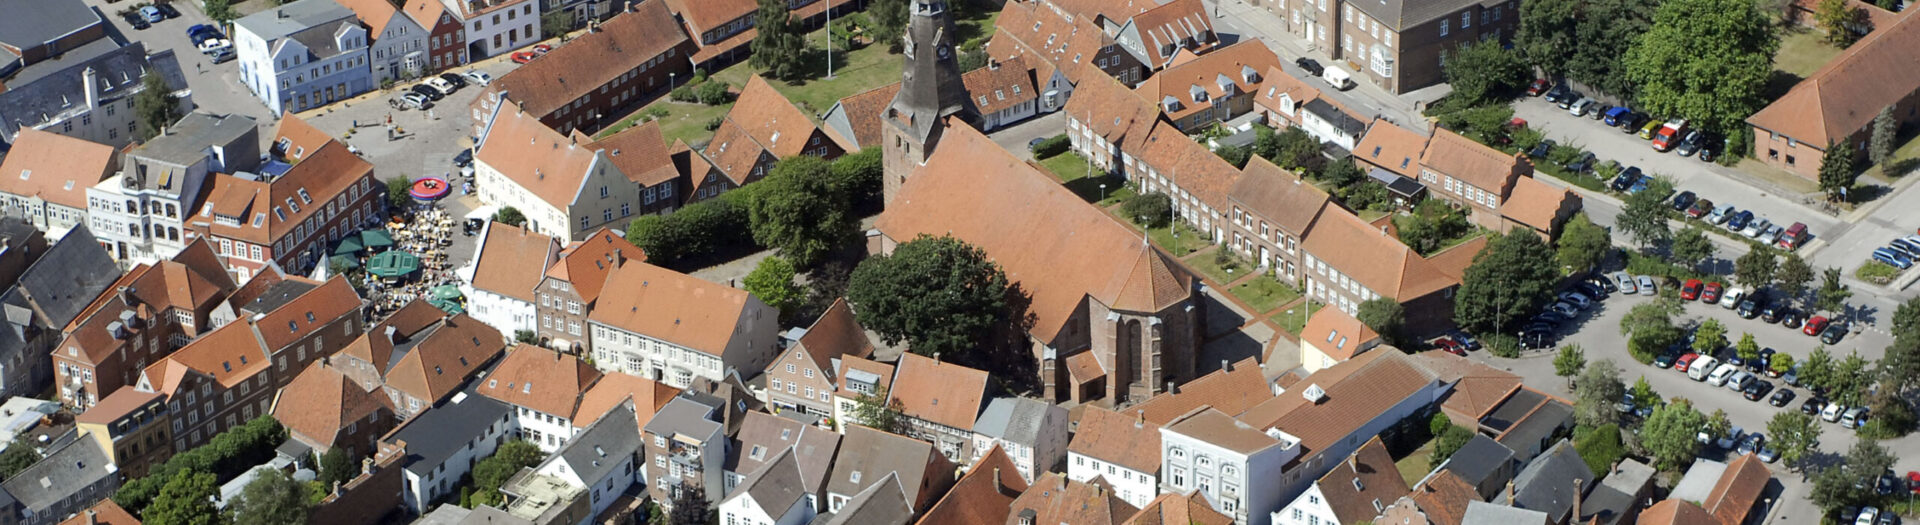 Picture of Tønder taken from a helicopter perspective